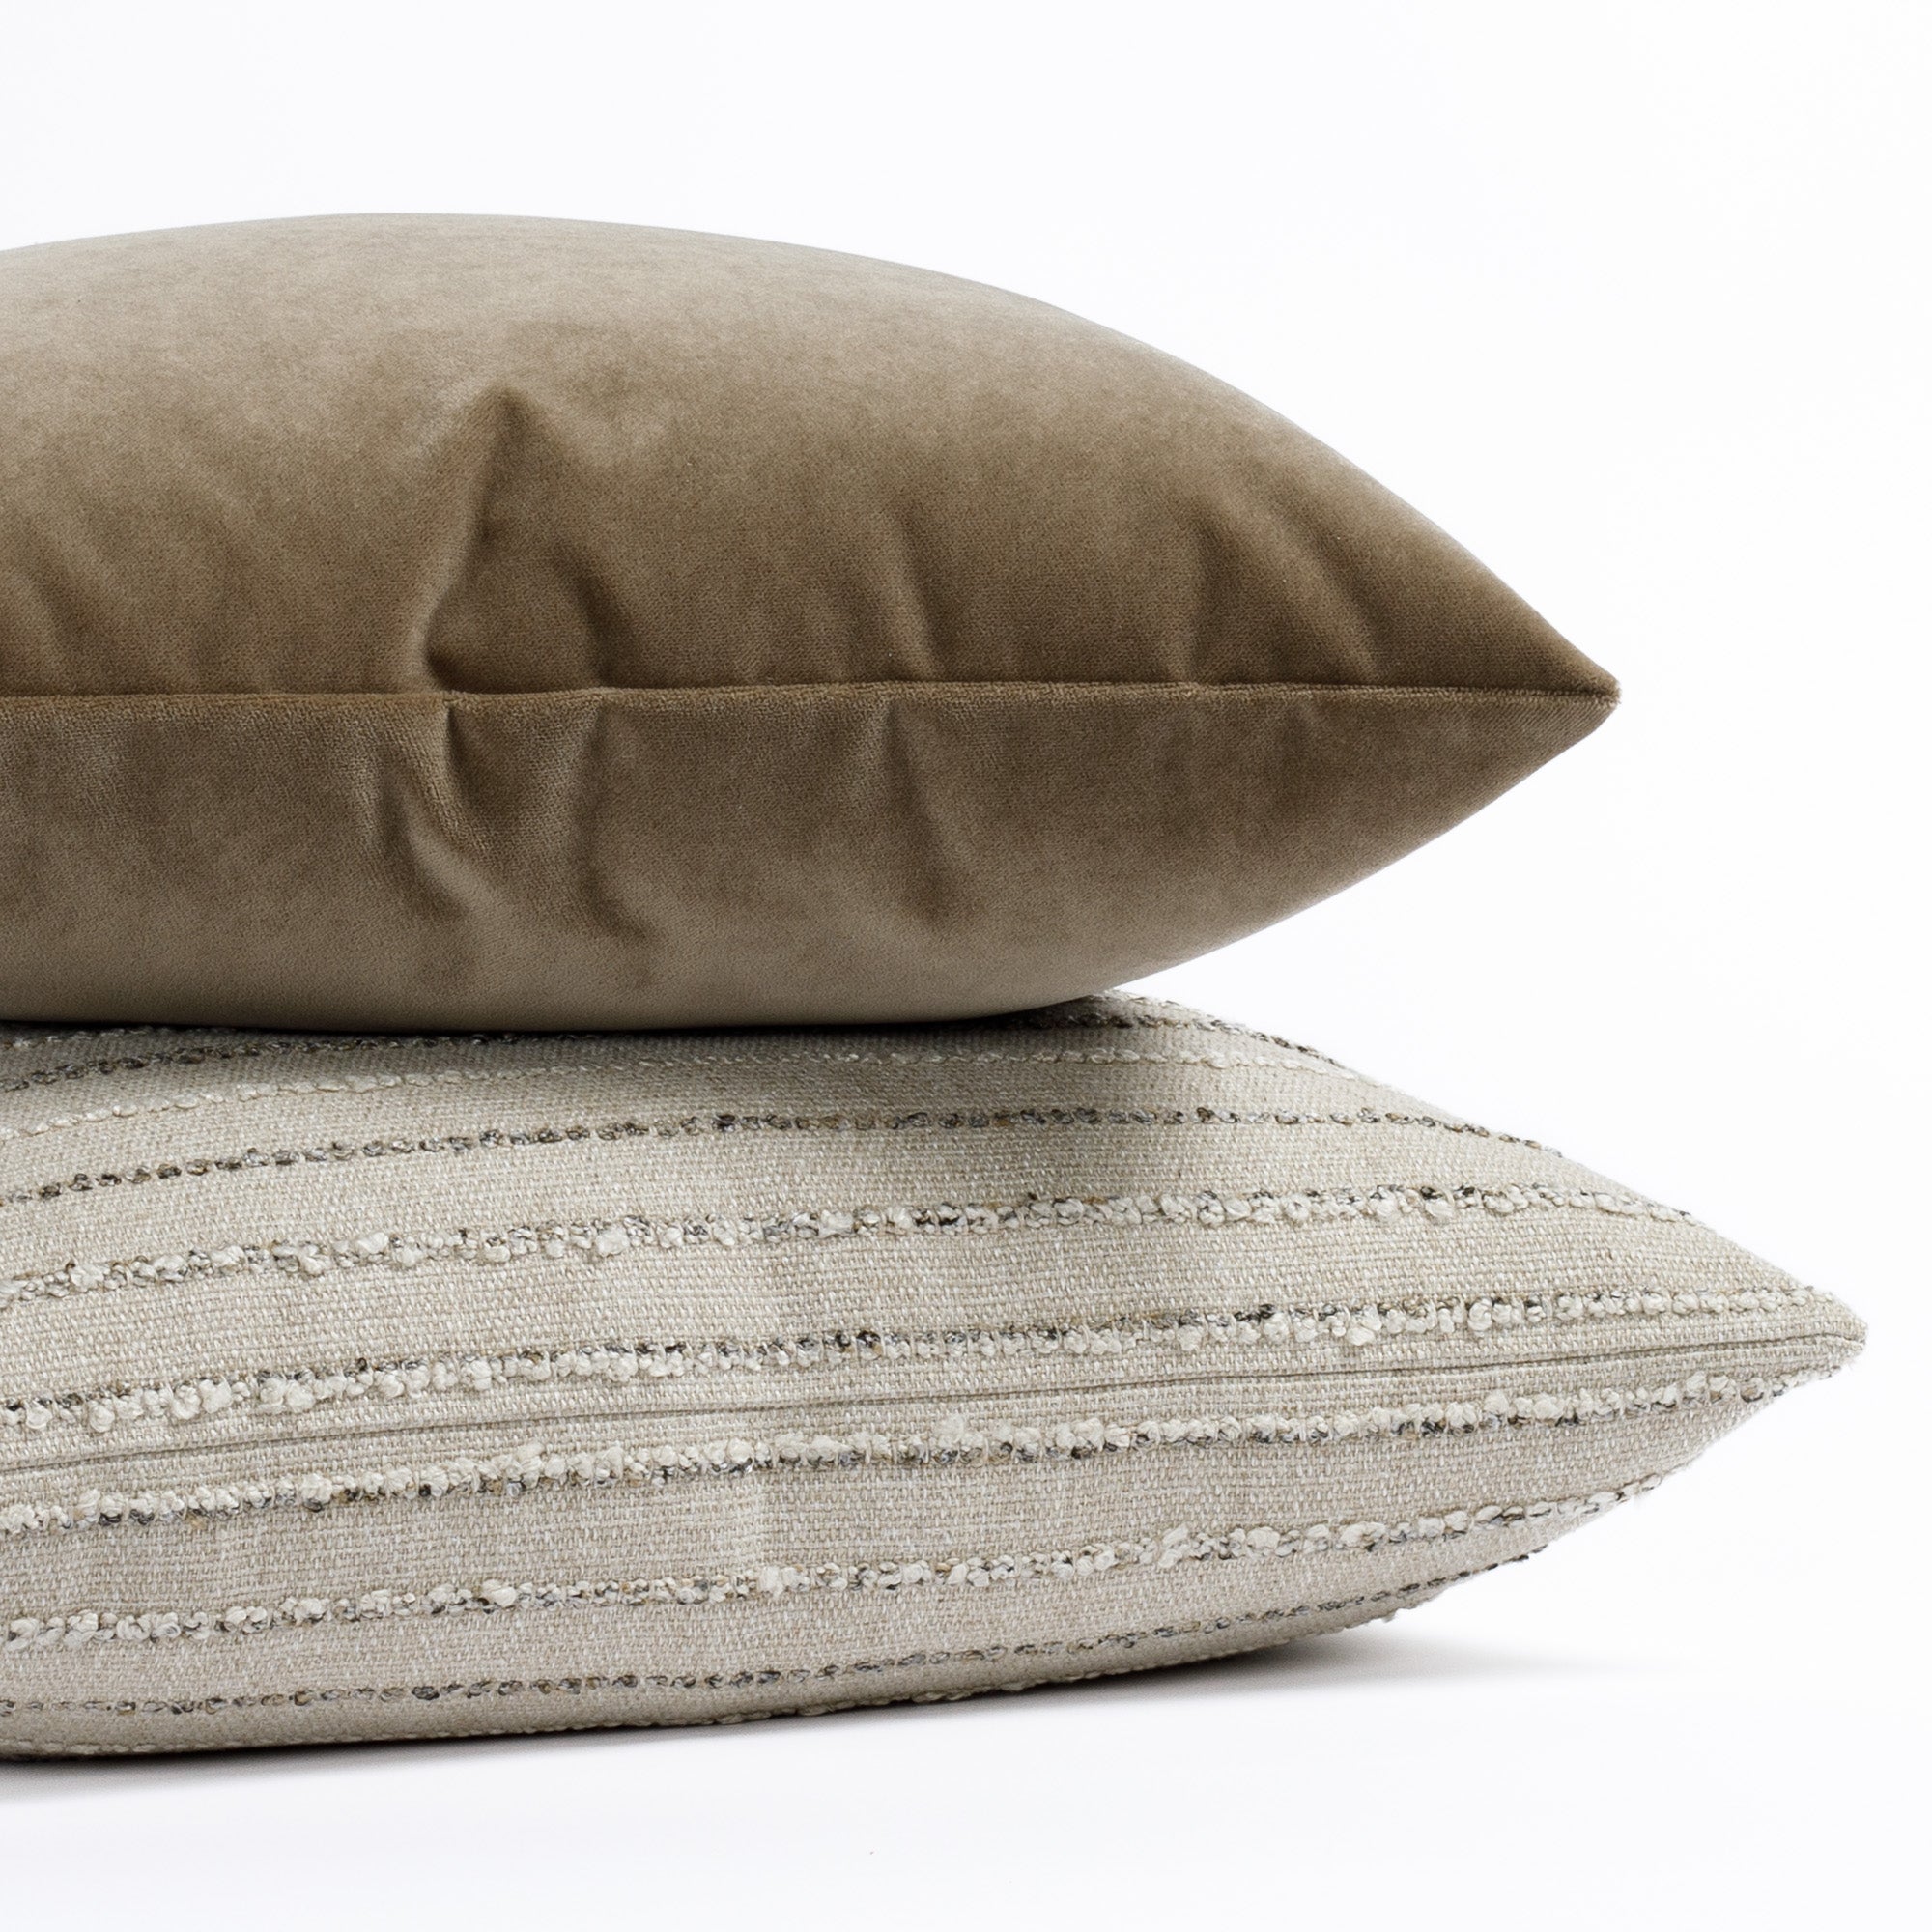 neutral earth toned Tonic Living Pillows